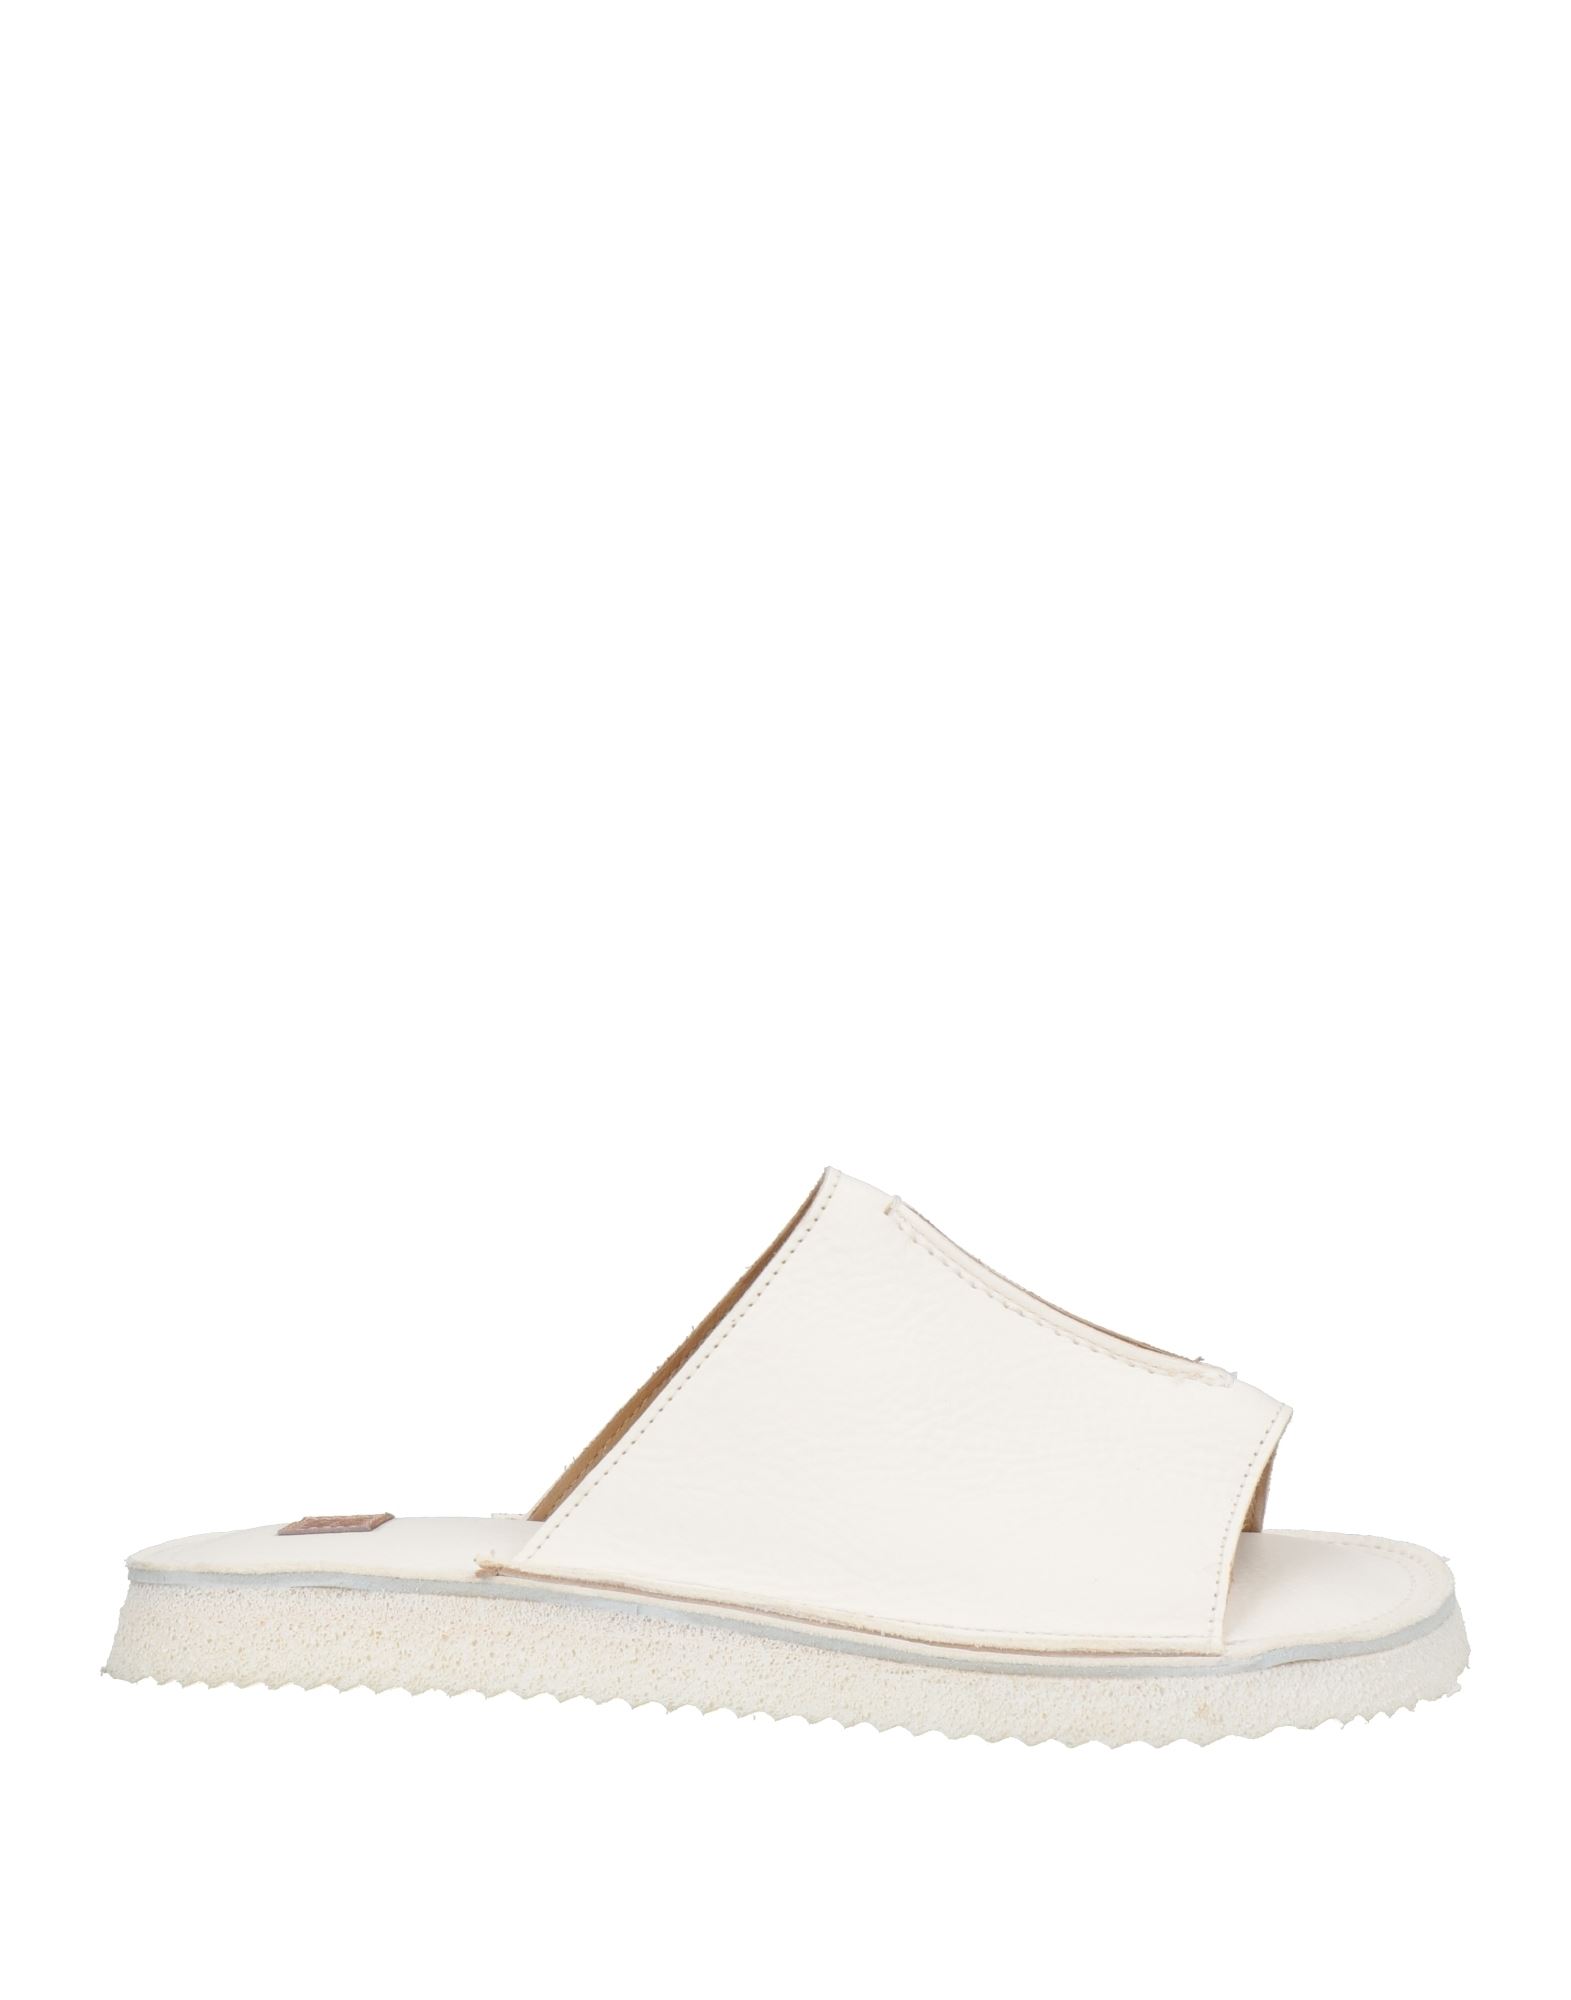 Moma Sandals In White